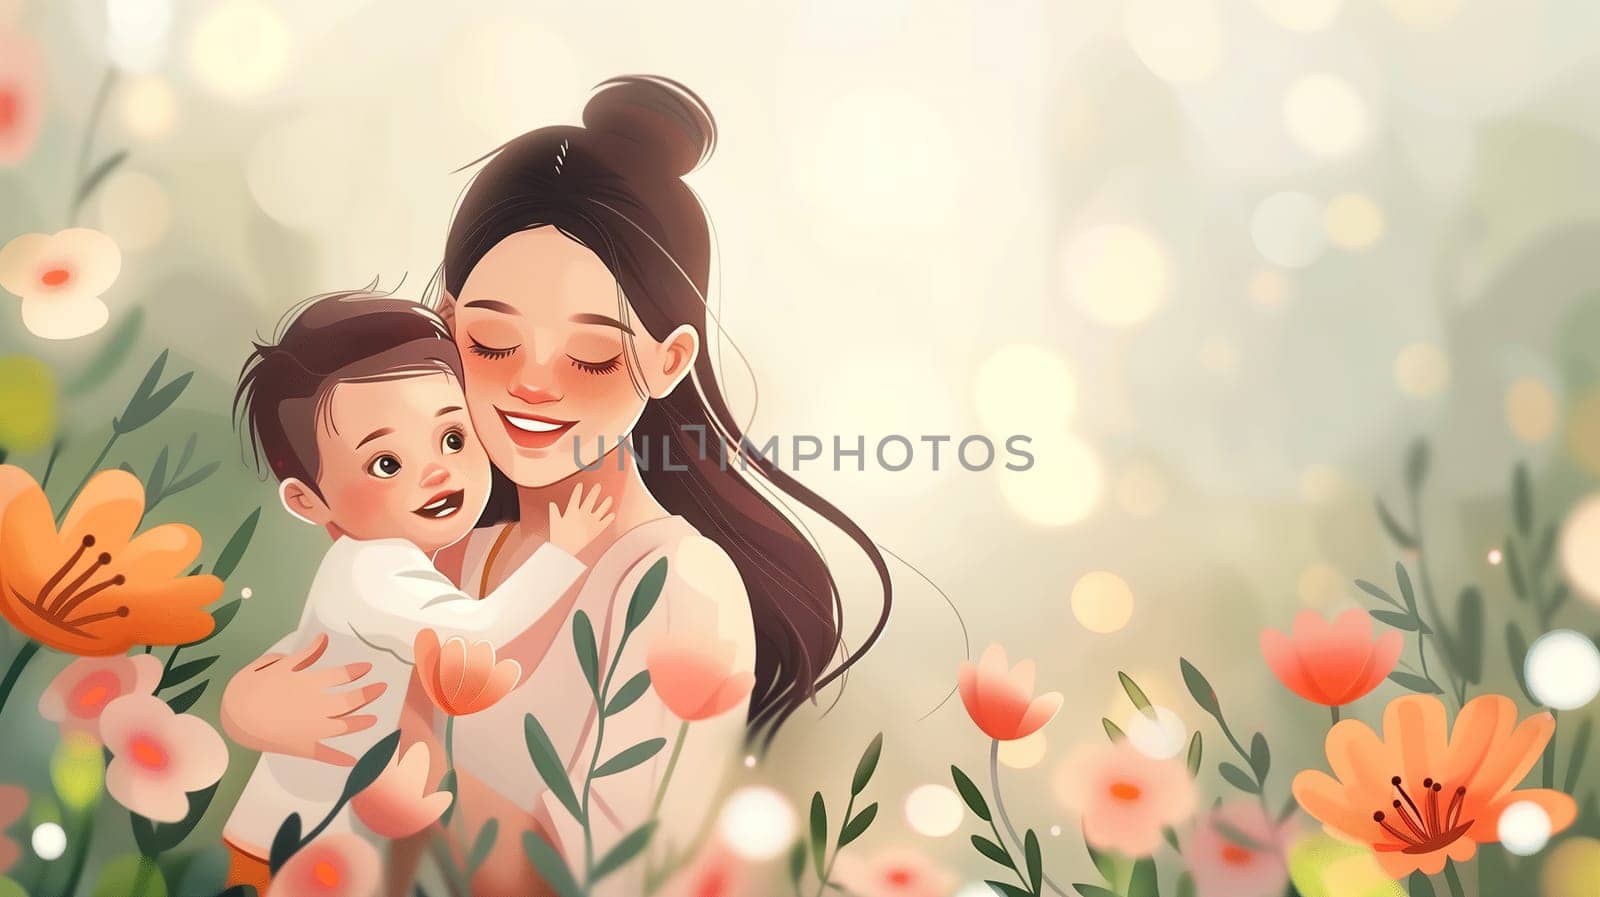 A woman stands in a field of colorful flowers, cradling a baby in her arms. The mother gazes lovingly at the infant, surrounded by natures beauty.